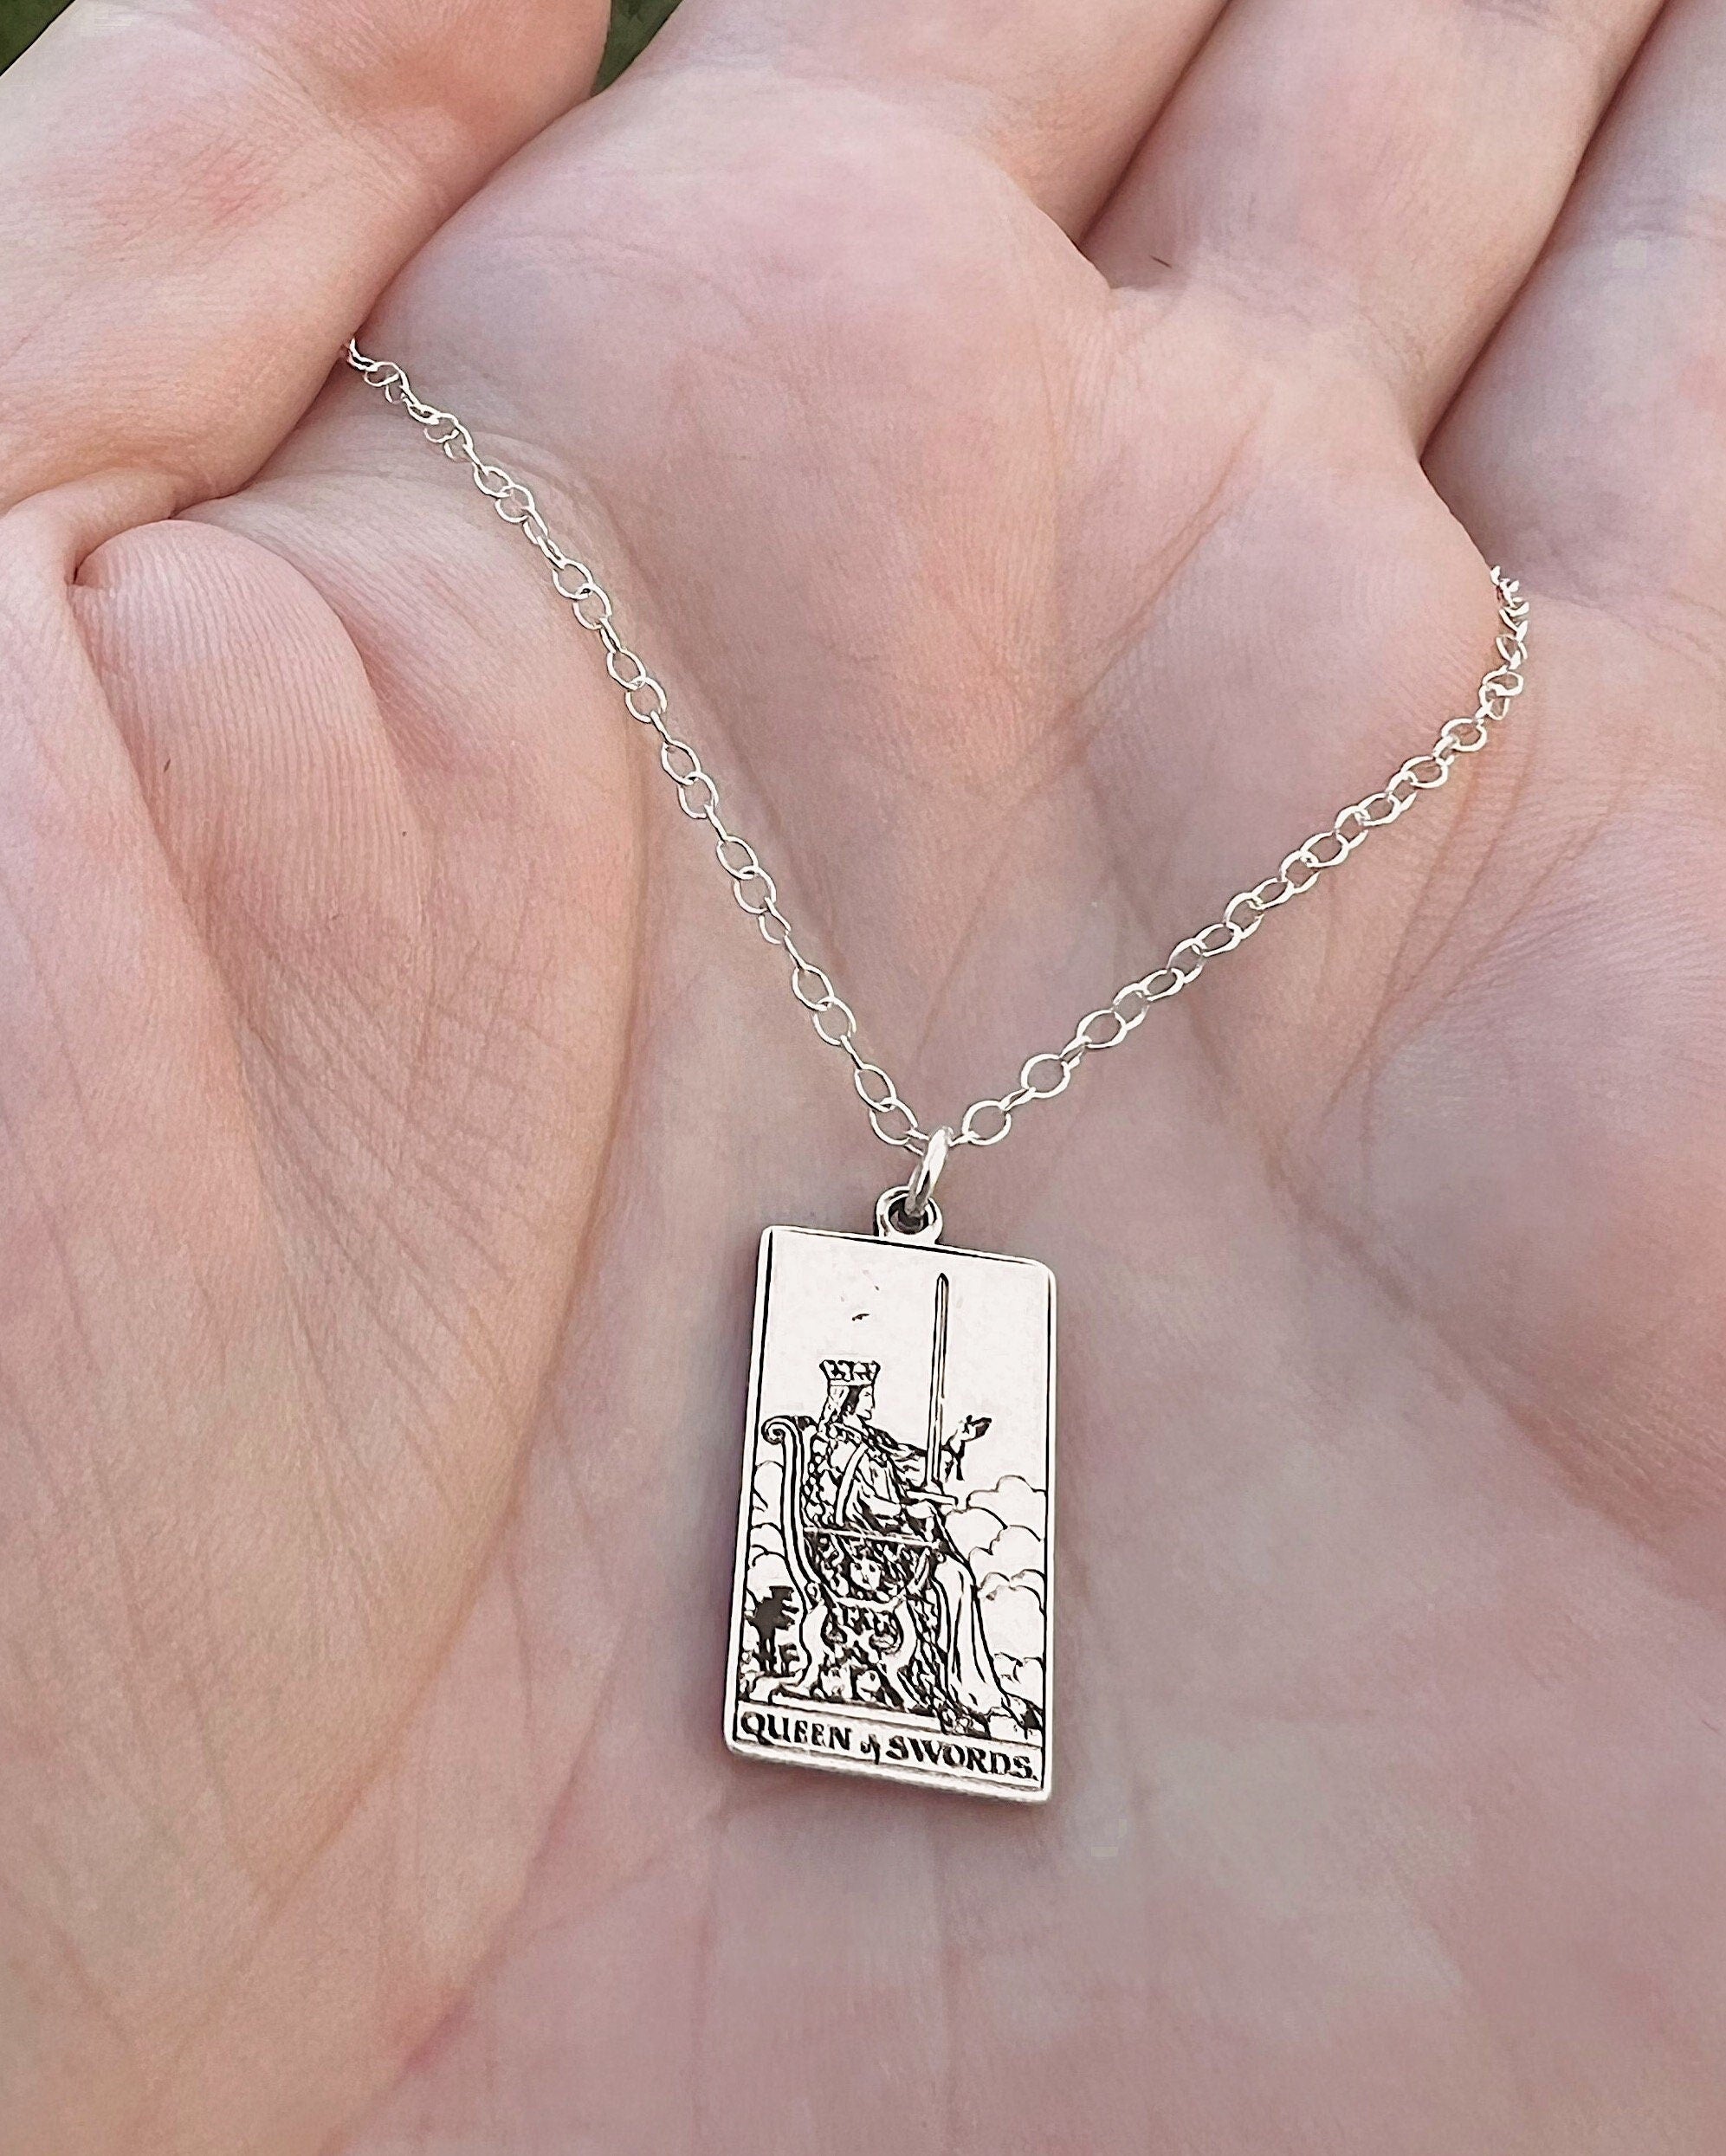 Queen of Swords Tarot Card Necklace - Sterling Silver